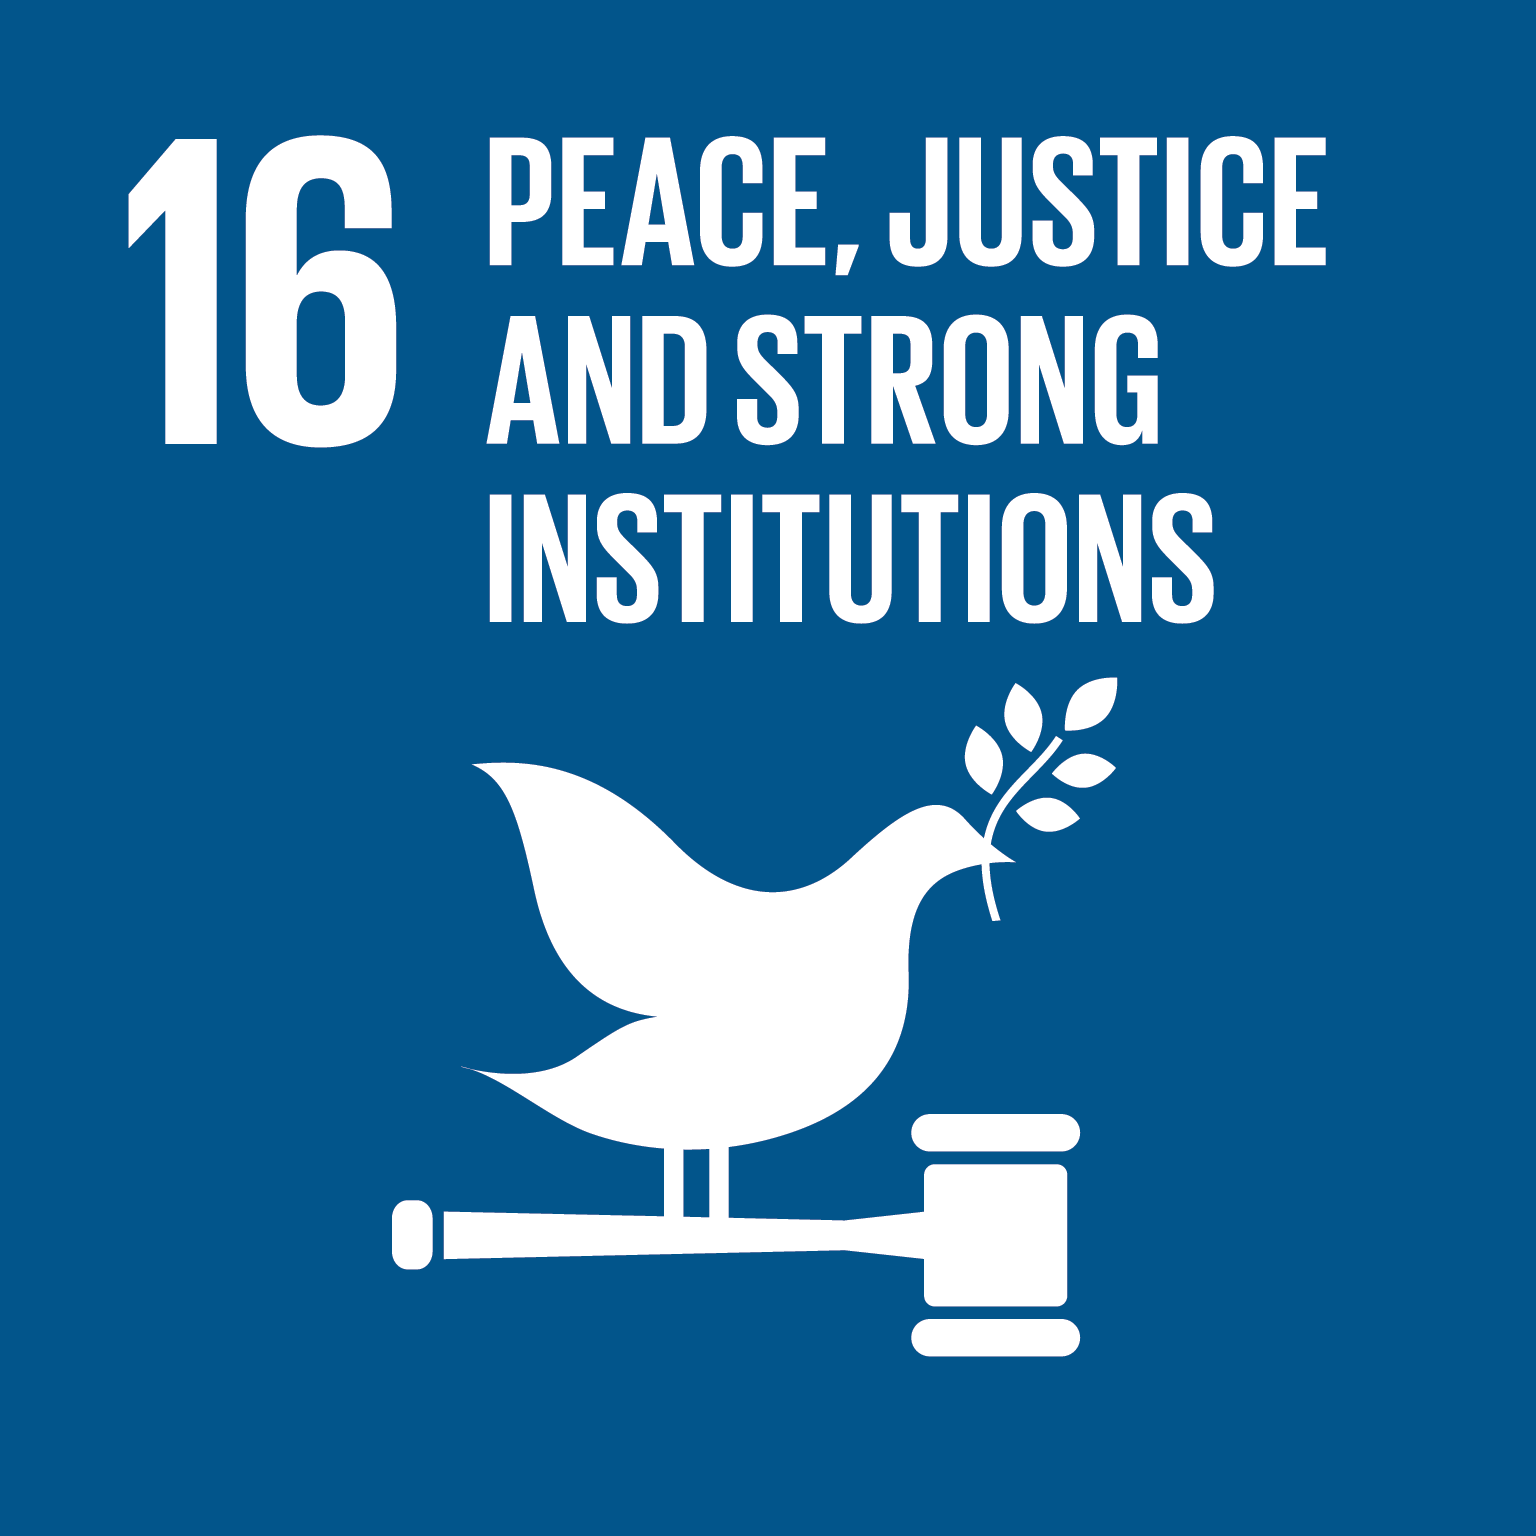 Goal 16. Peace, justice and strong institutions